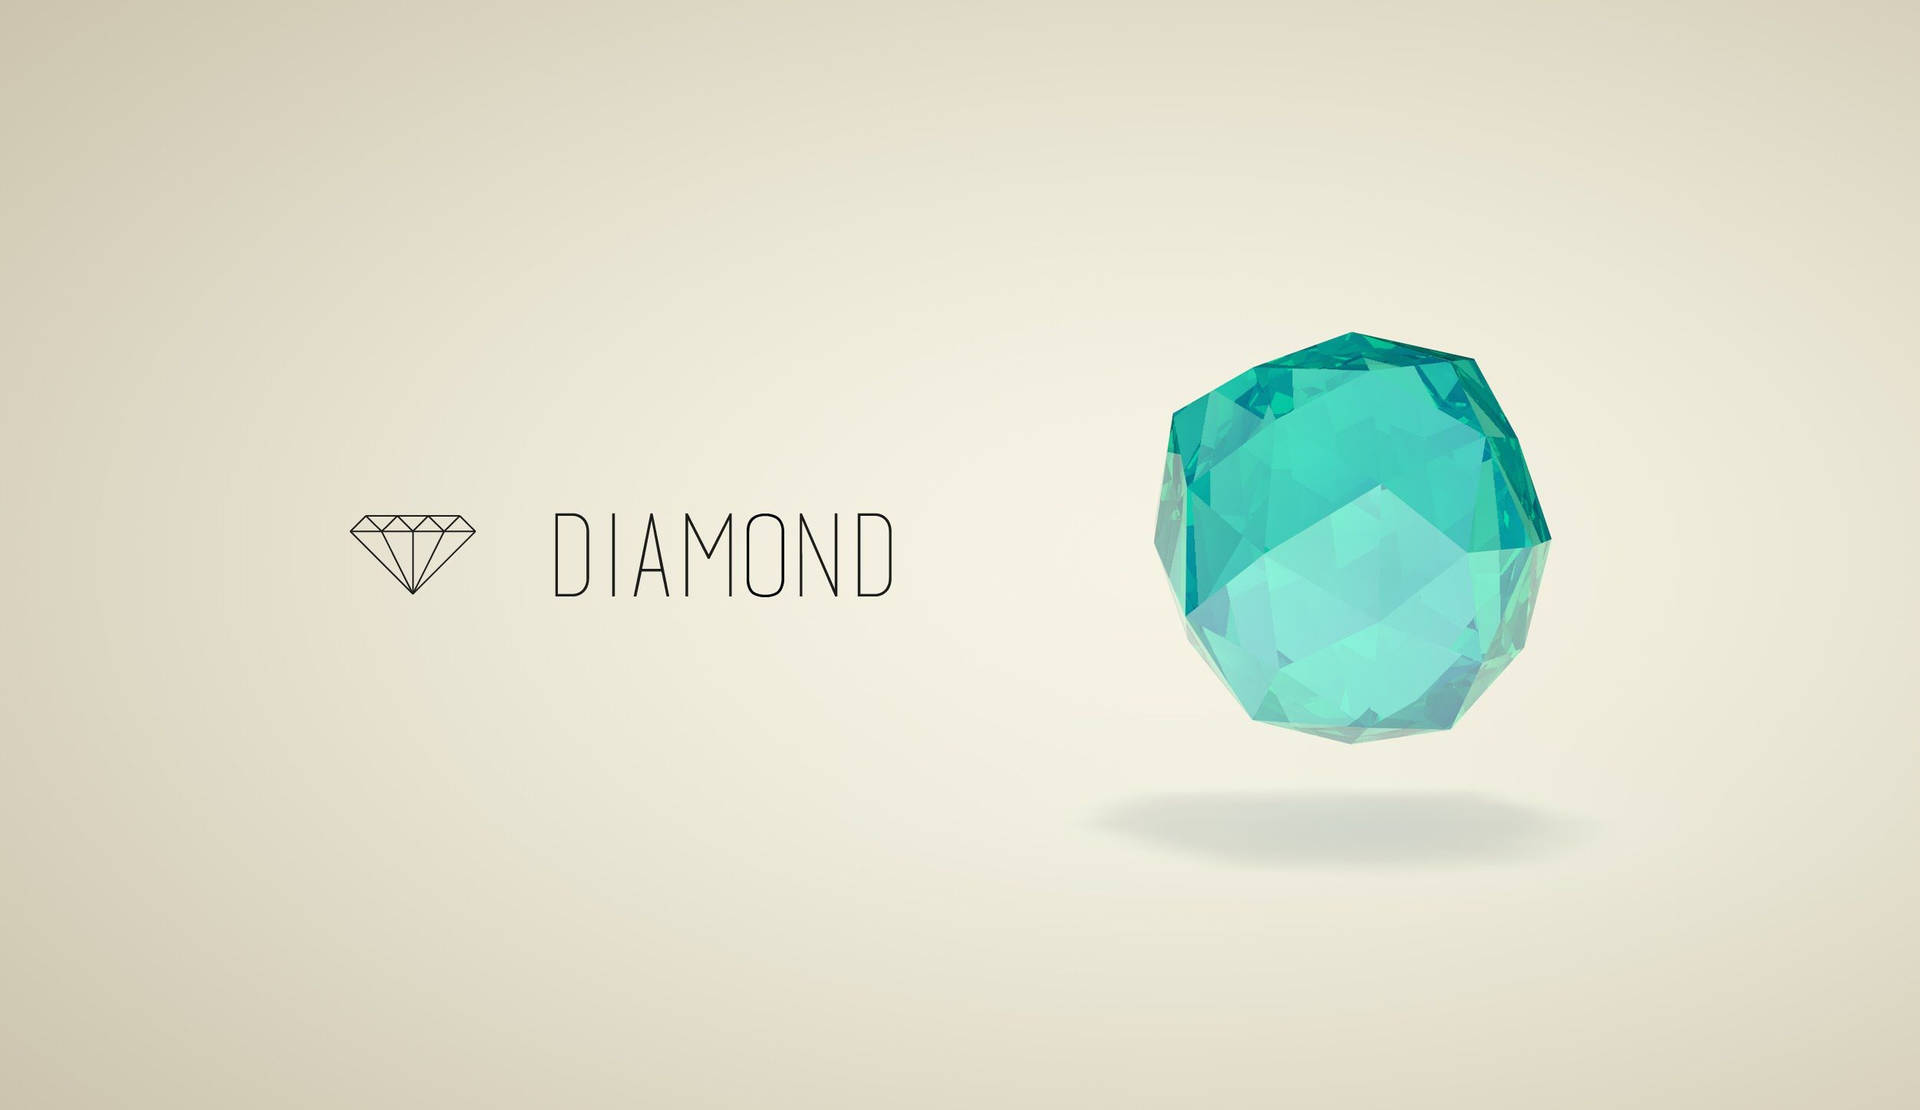 Diamond 2502X1446 Wallpaper and Background Image